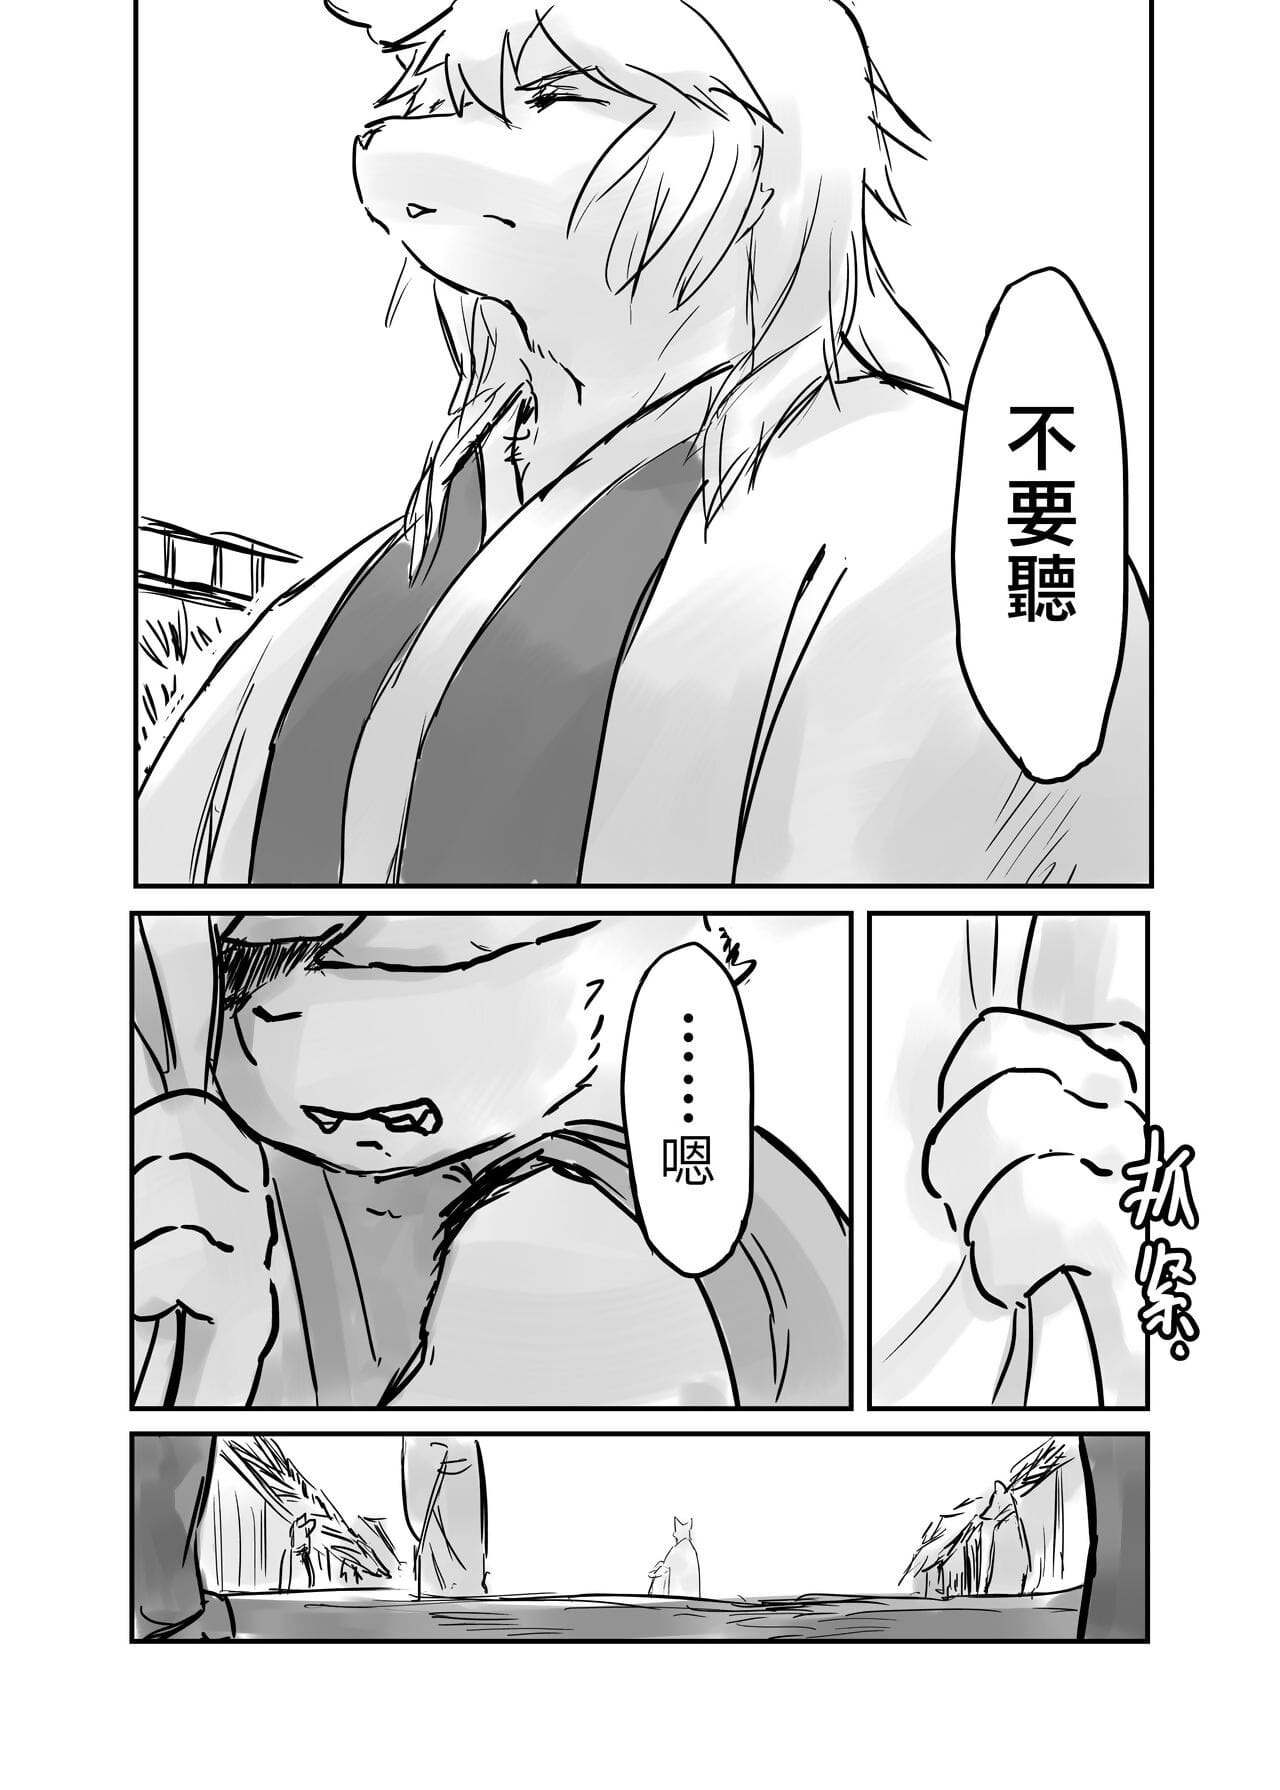 （the Besucher 他乡之人 by：鬼流 Teil 2 page 1